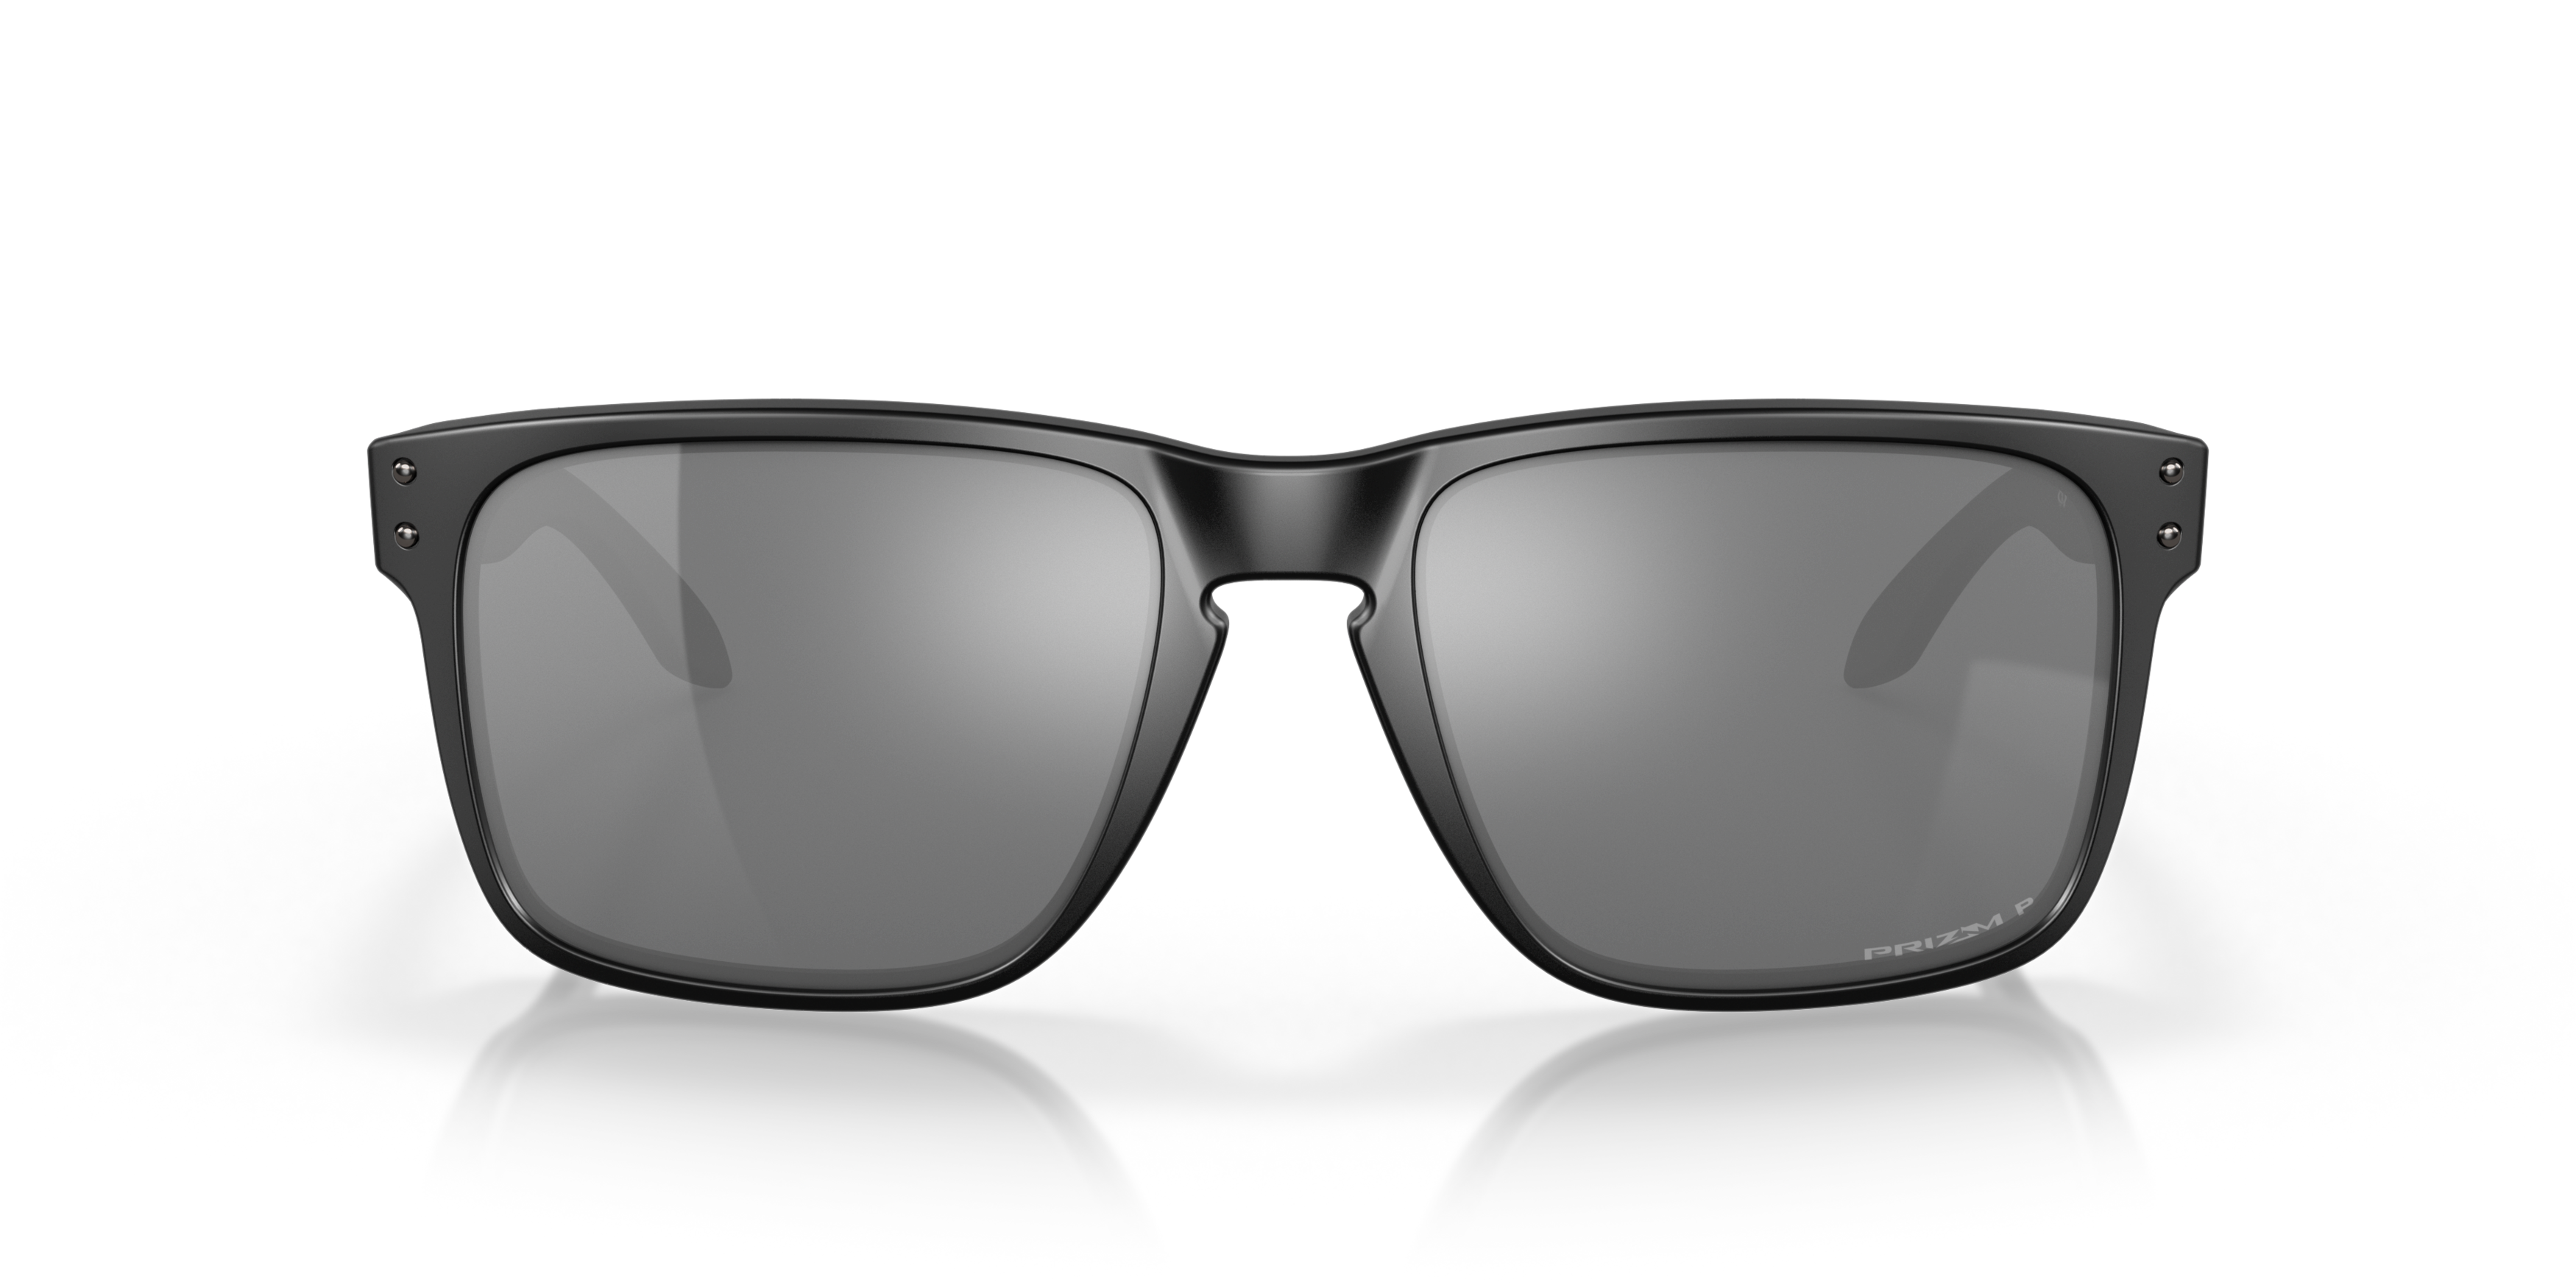 [products.image.front] Oakley Holbrook XL OO9417 BB